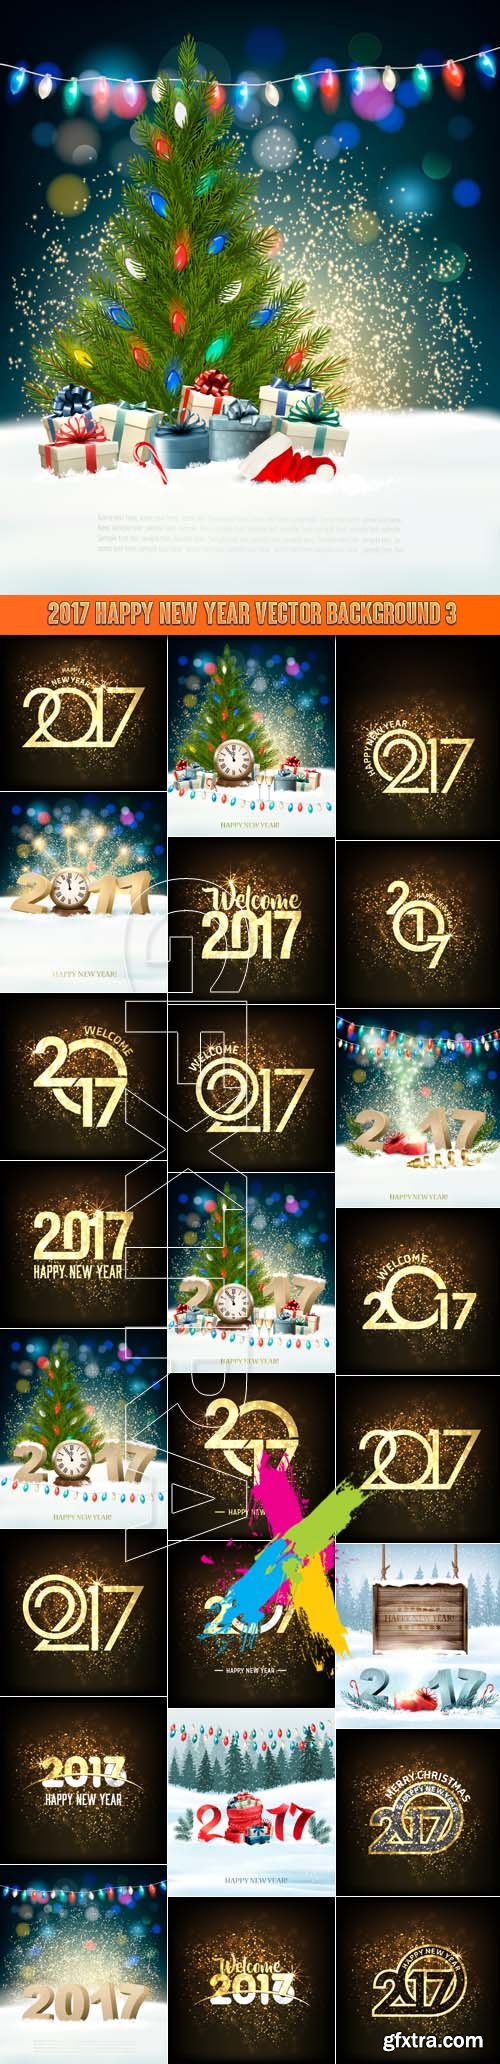 2017 Happy New Year vector background 3